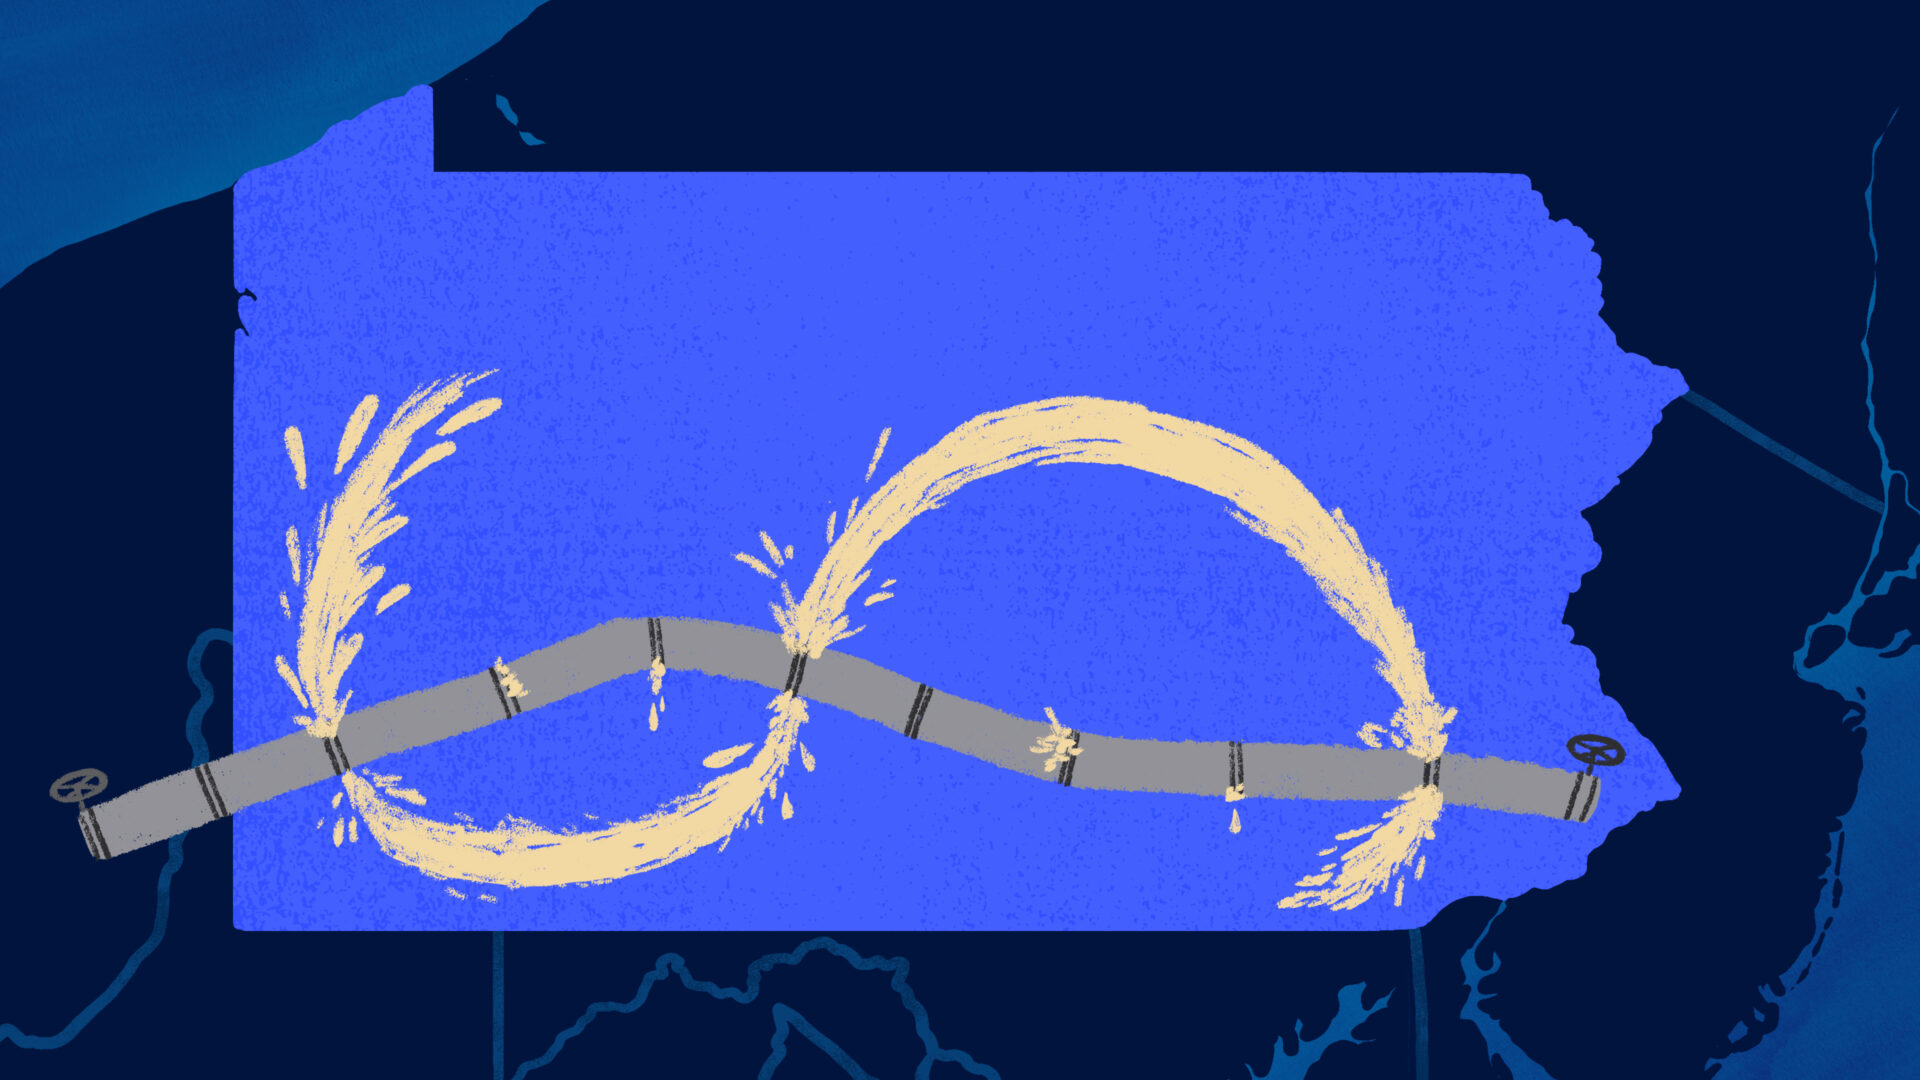 An illustration of the Mariner East II pipeline running across PA with drilling fluid leaks creating a dollar sign.